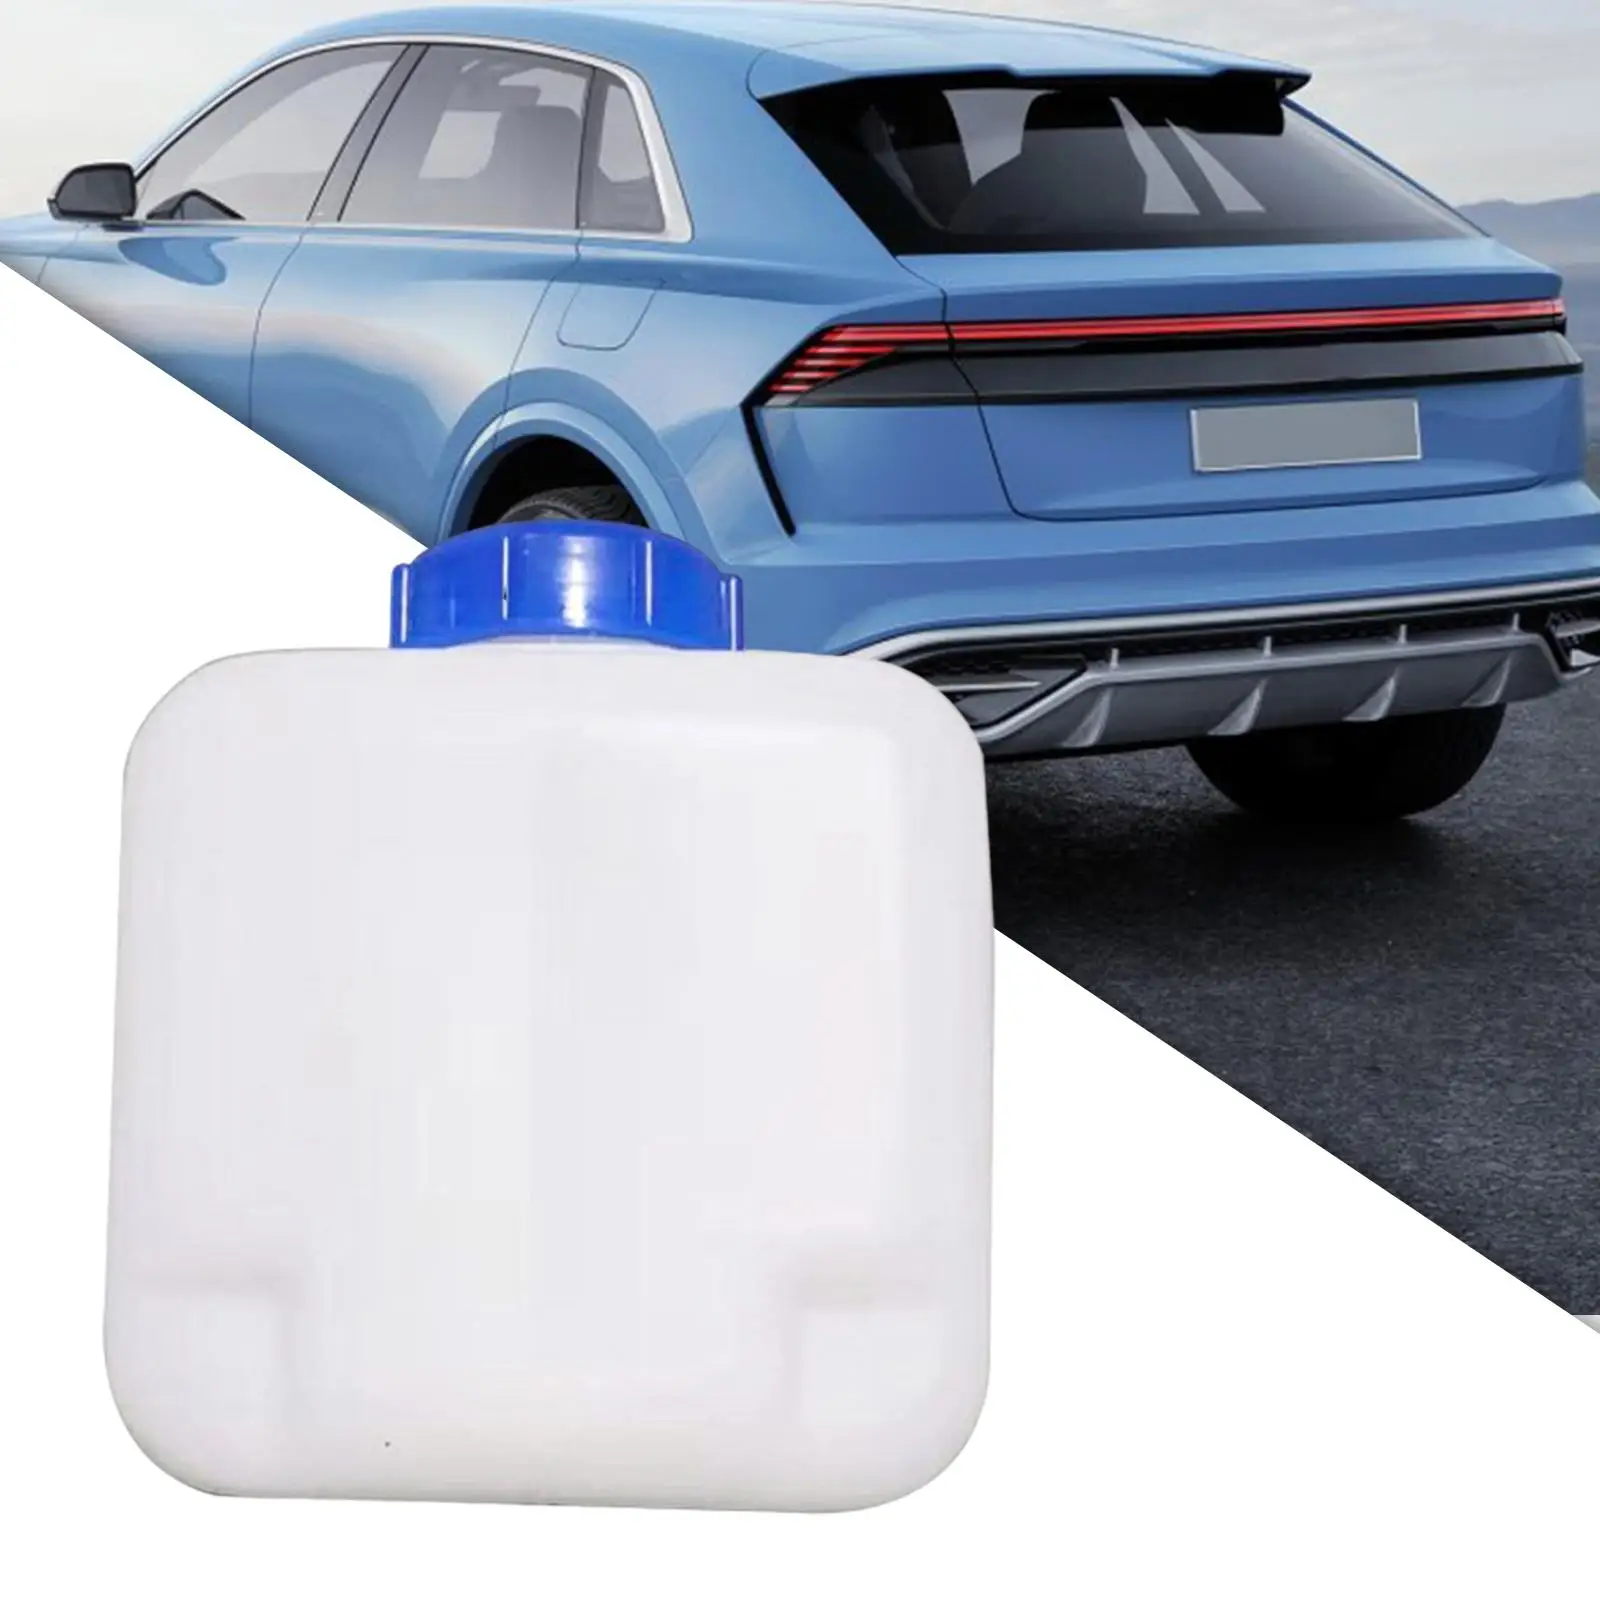 Sturdy Gasoline Petrol Tank Heat Resistant Container Jar Portable 5L for Air Parking Heater Vehicle Car Replaces Assembly